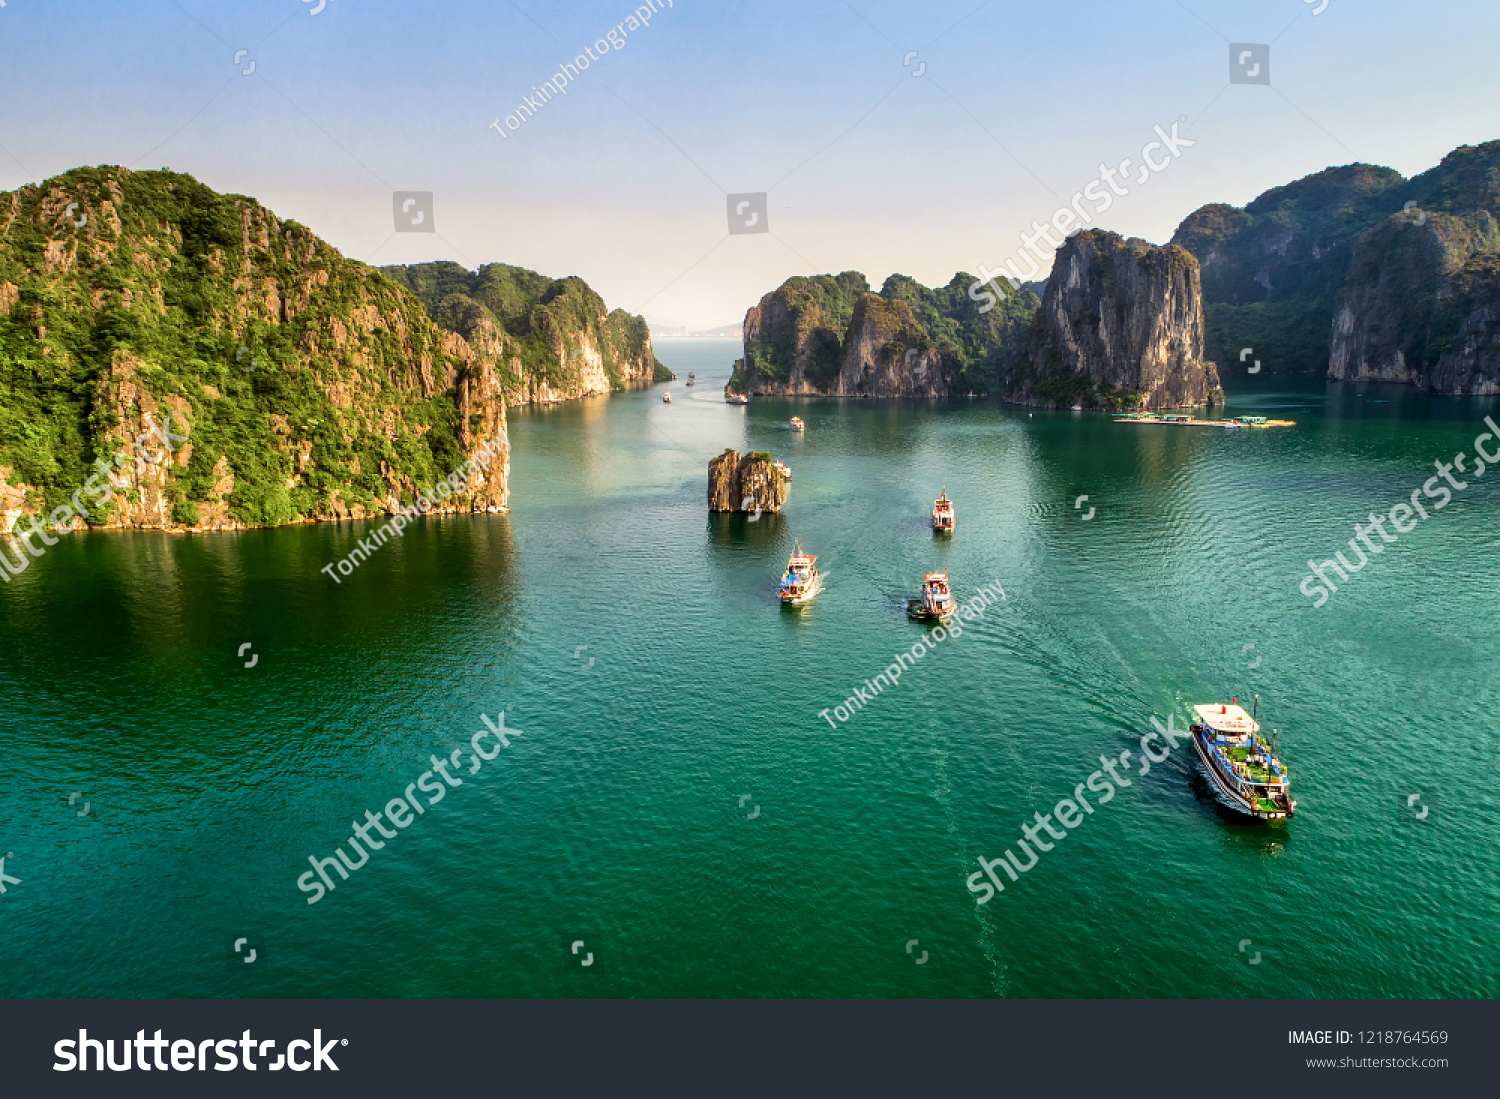 Aerial view floating fishing village and rock island, Halong Bay, Vietnam, Southeast Asia. UNESCO World Heritage Site. Junk boat cruise to Ha Long Bay. Popular landmark, famous destination of Vietnam #1218764569